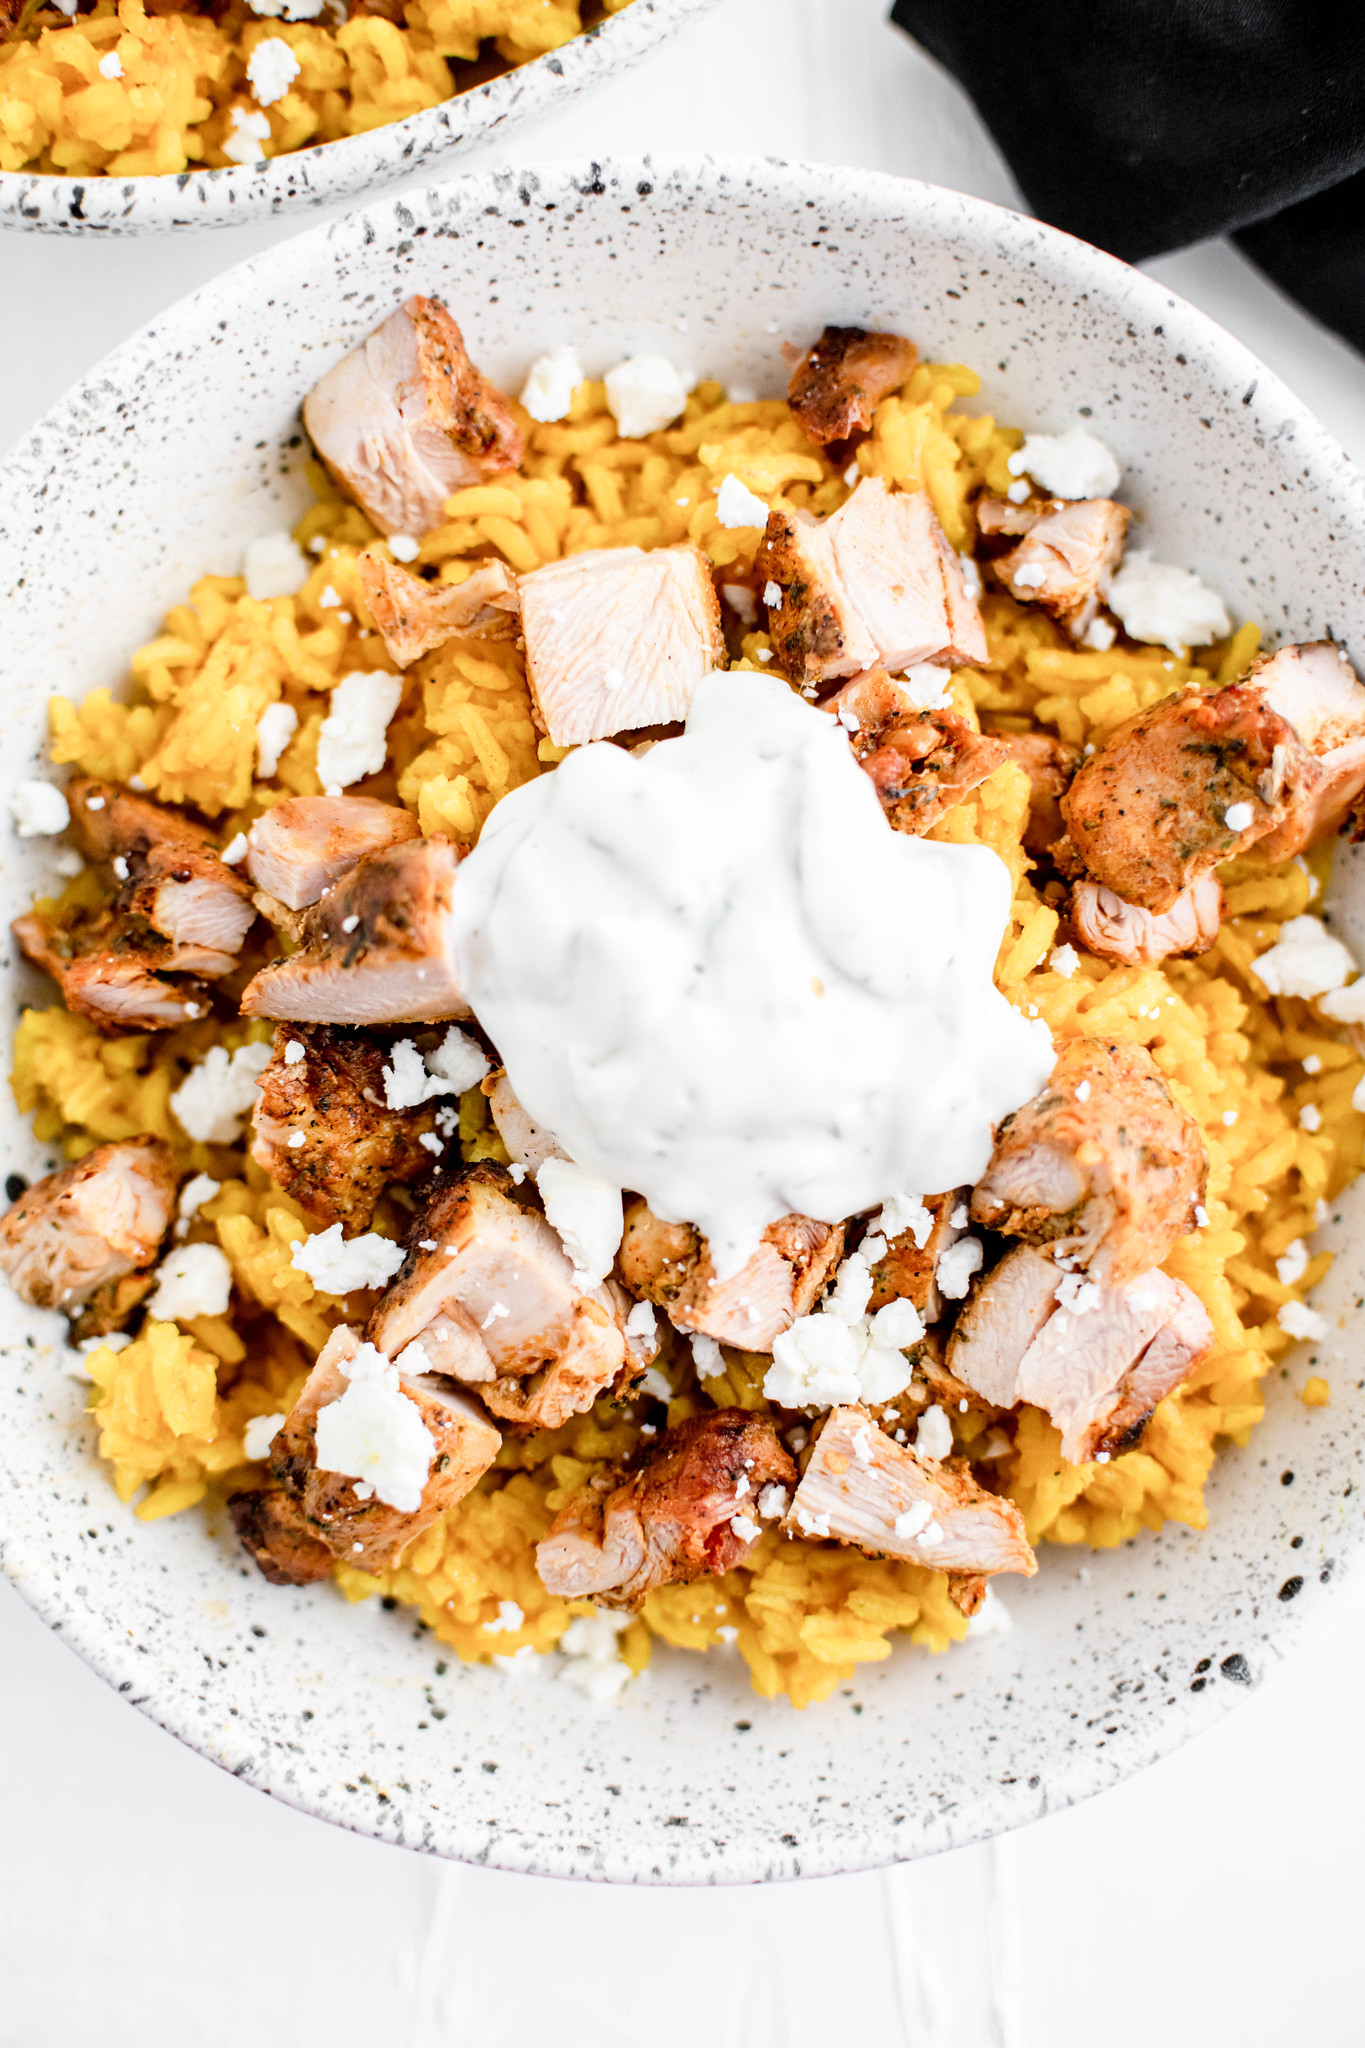 Bowl filled with golden tumeric rice that is topped with diced shawarma chicken, crumbled feta cheese and a dollop of tzatziki.